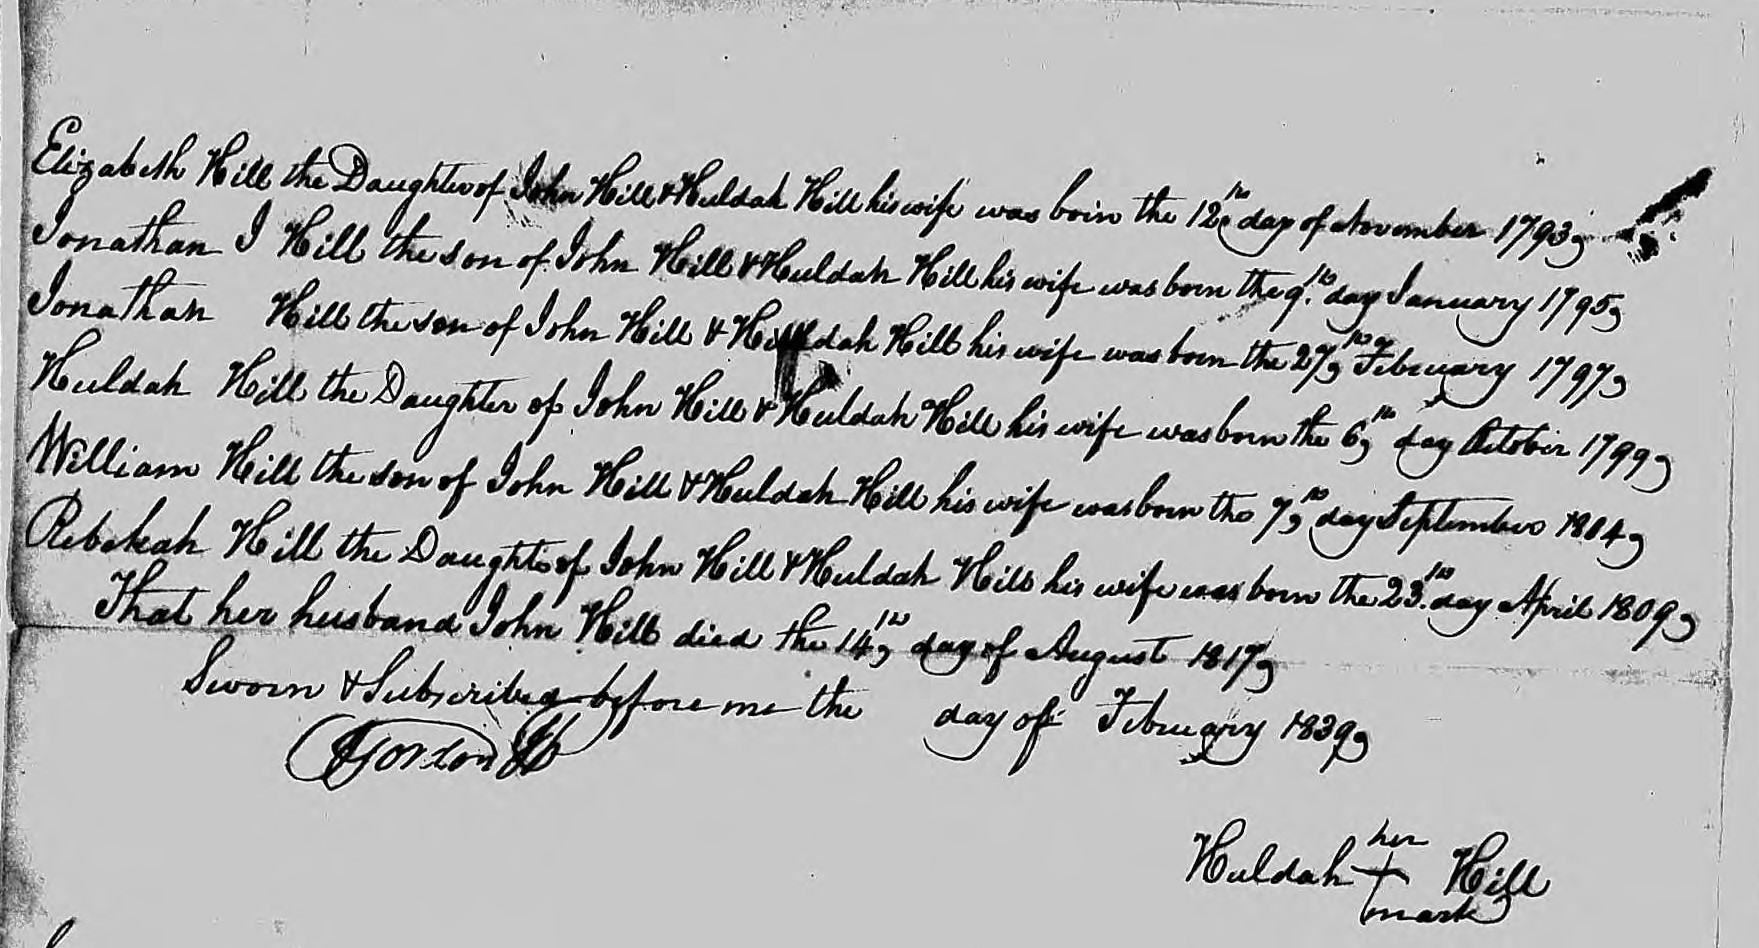 Affidavit of Huldah Hill in support of her Pension Claim, 22 February 1839, page 2